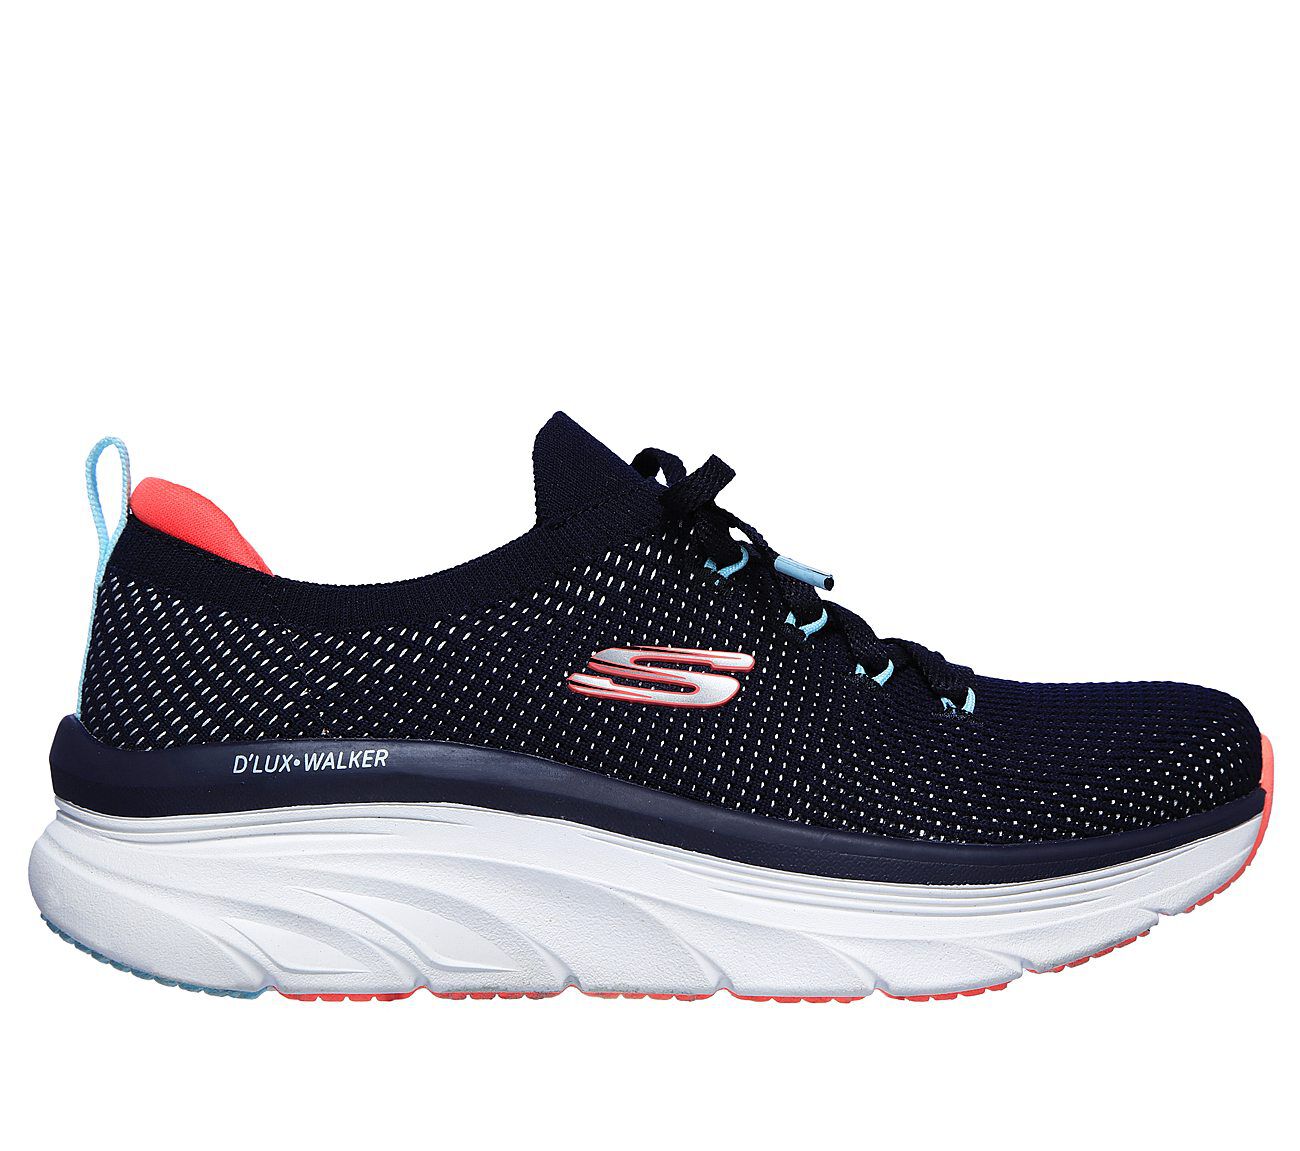 skechers air cooled memory foam shoes for women